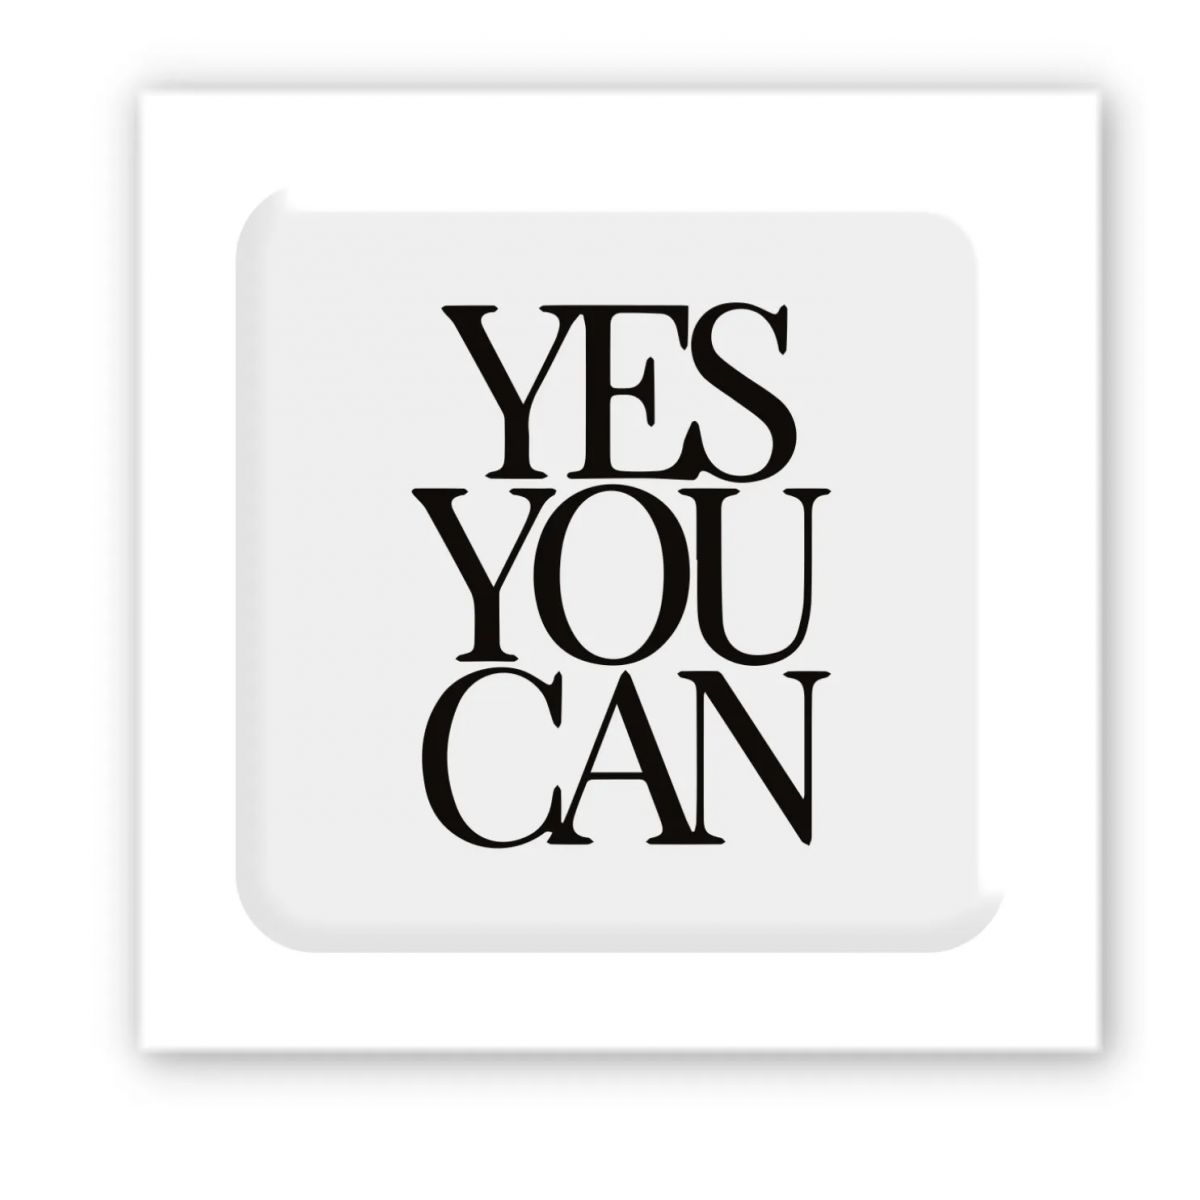 3D стикер "Yes, you can" (цена за 1 шт)